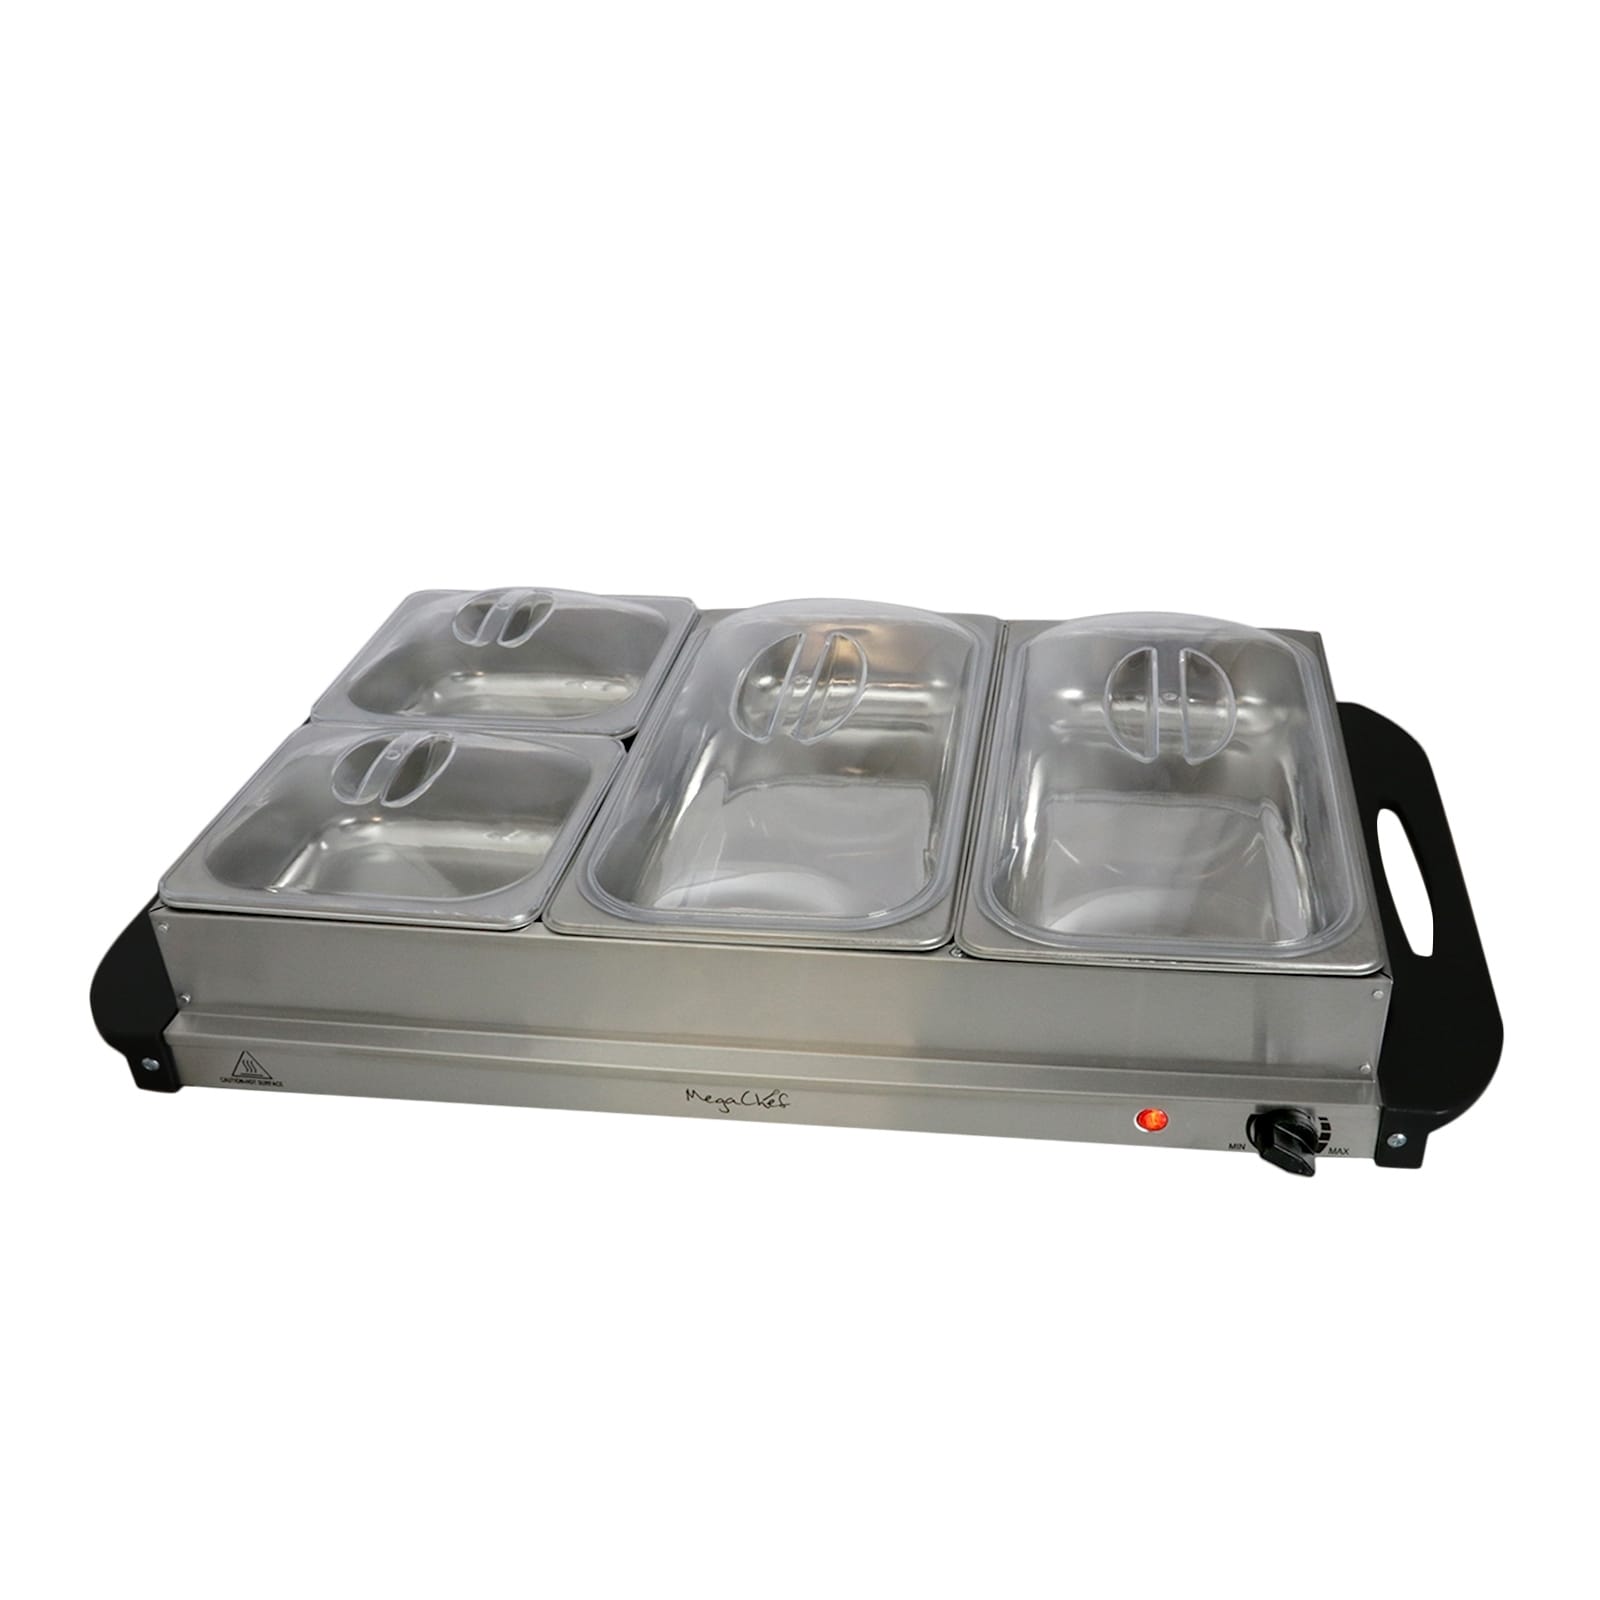 MegaChef Buffet Server & Food Warmer Tray Holder with Four